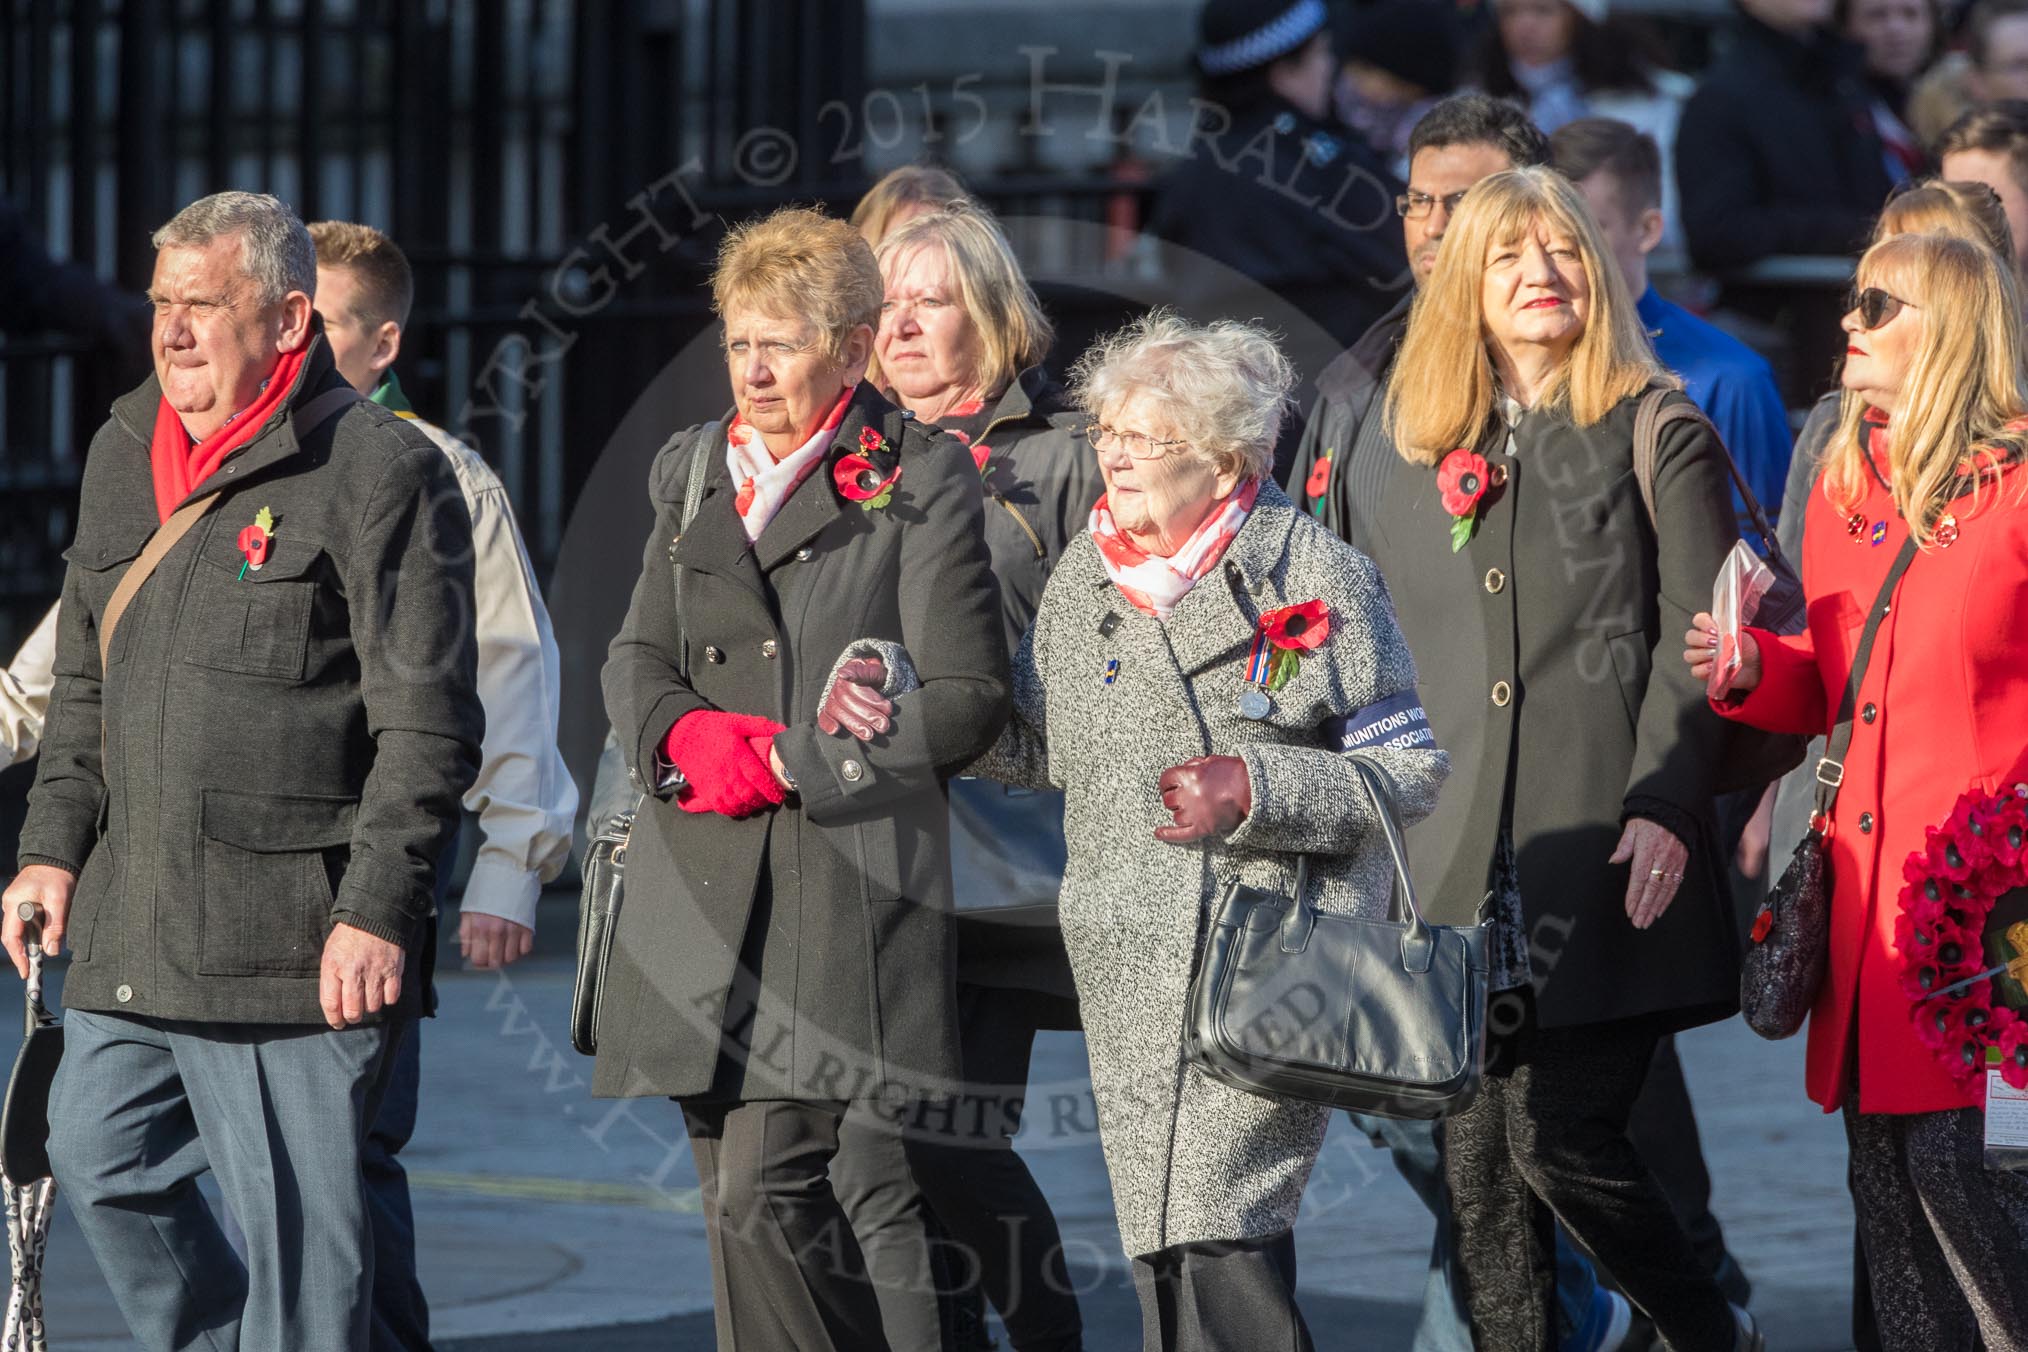 March Past, Remembrance Sunday at the Cenotaph 2016: M49 The British Evacuees Association.
Cenotaph, Whitehall, London SW1,
London,
Greater London,
United Kingdom,
on 13 November 2016 at 13:20, image #3033